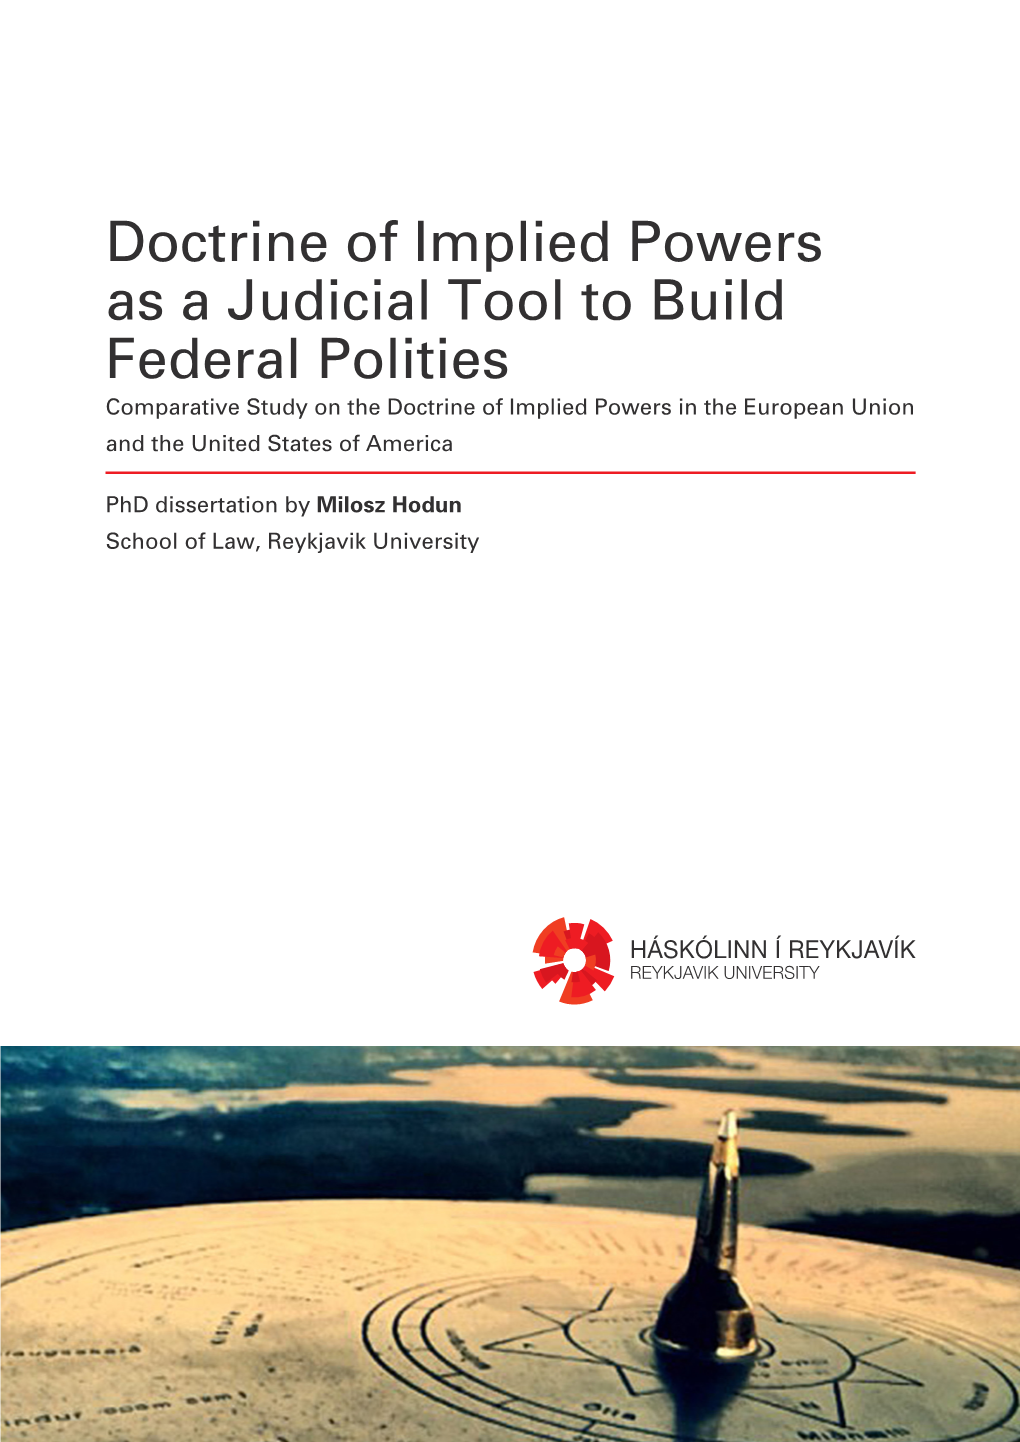 Doctrine of Implied Powers As a Judicial Tool to Build Federal Polities